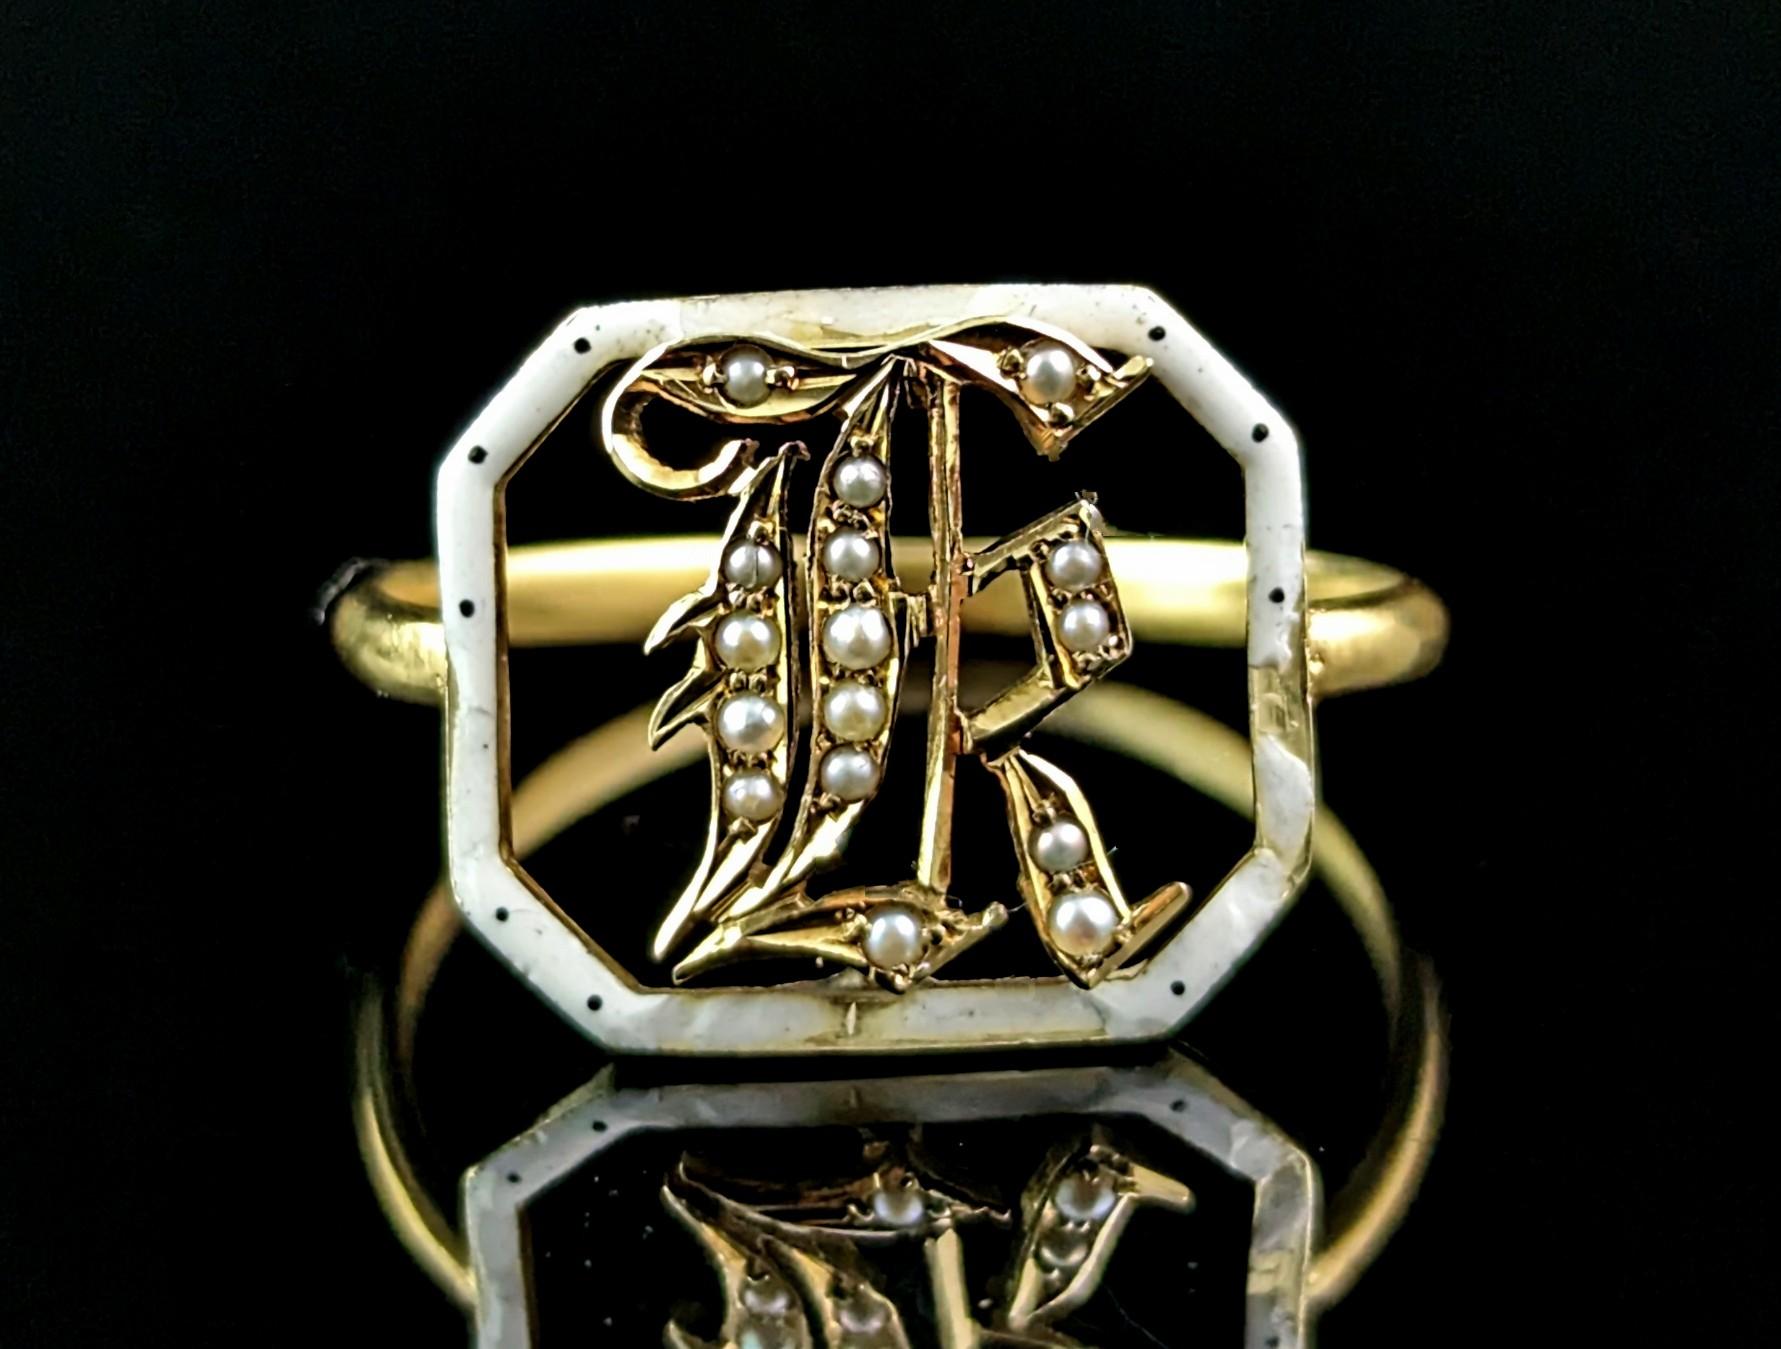 A wonderful antique conversion piece!

Crafted from a French 19th Century slider the fave is made up of the front of the slider, rich 18ct yellow gold with white and Black enamel detailing and a pearl set letter K to the centre, this could also work